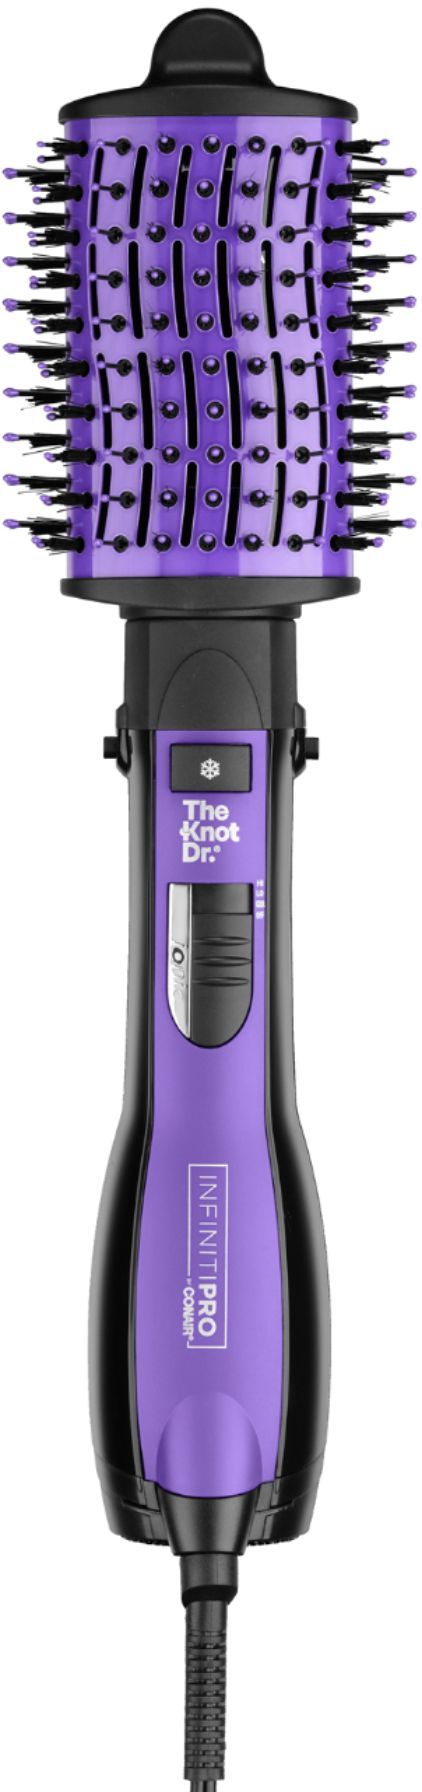 Infiniti Pro by Conair The Knot Dr. Hot Air Brush